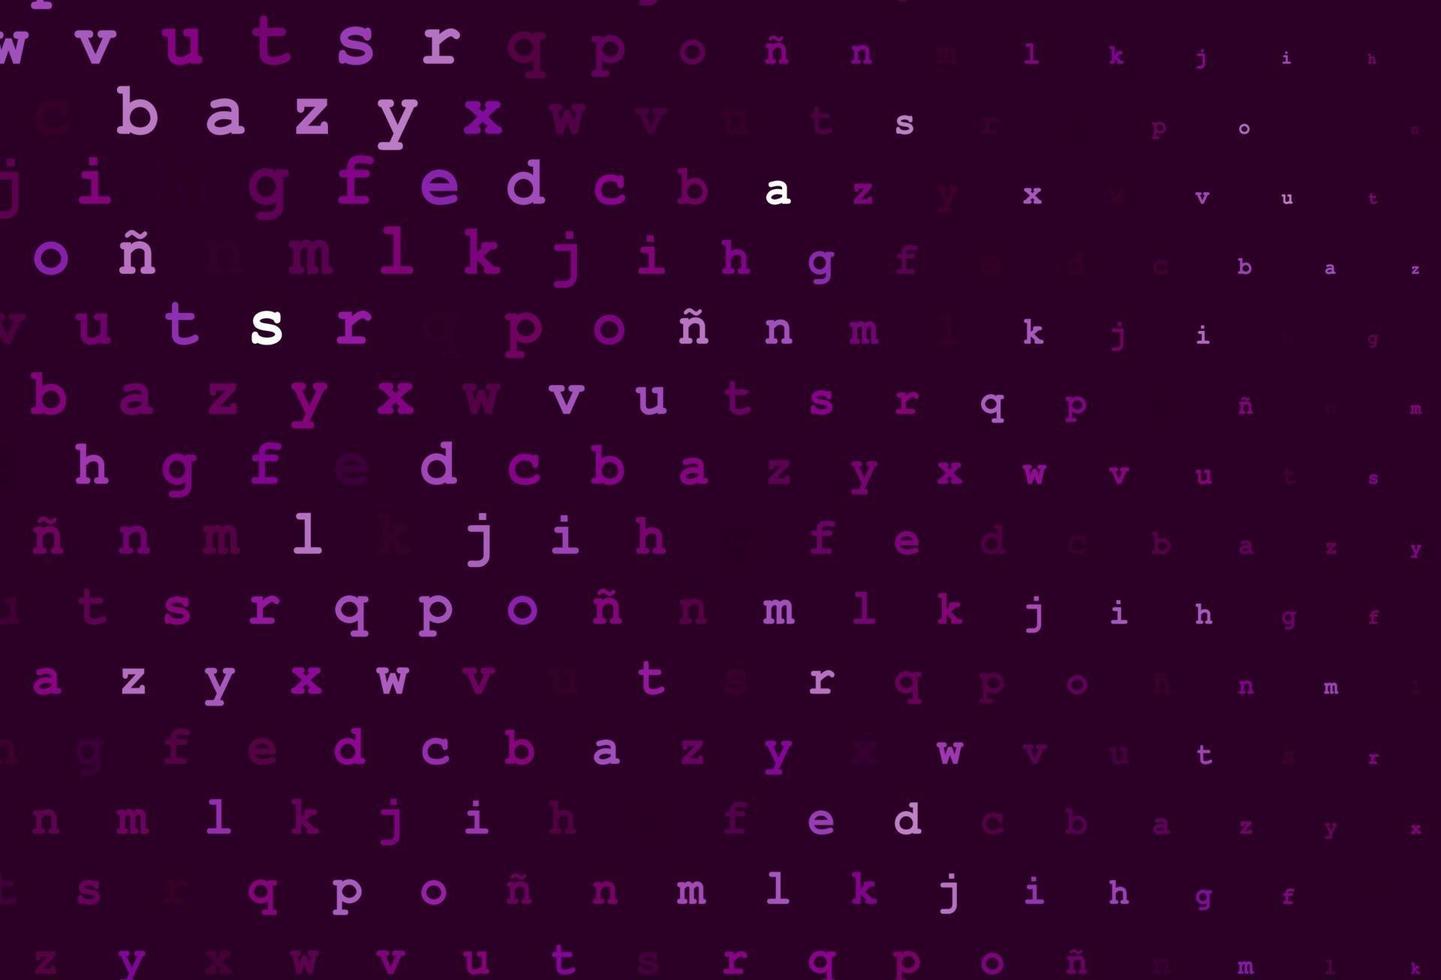 Dark purple vector texture with ABC characters.